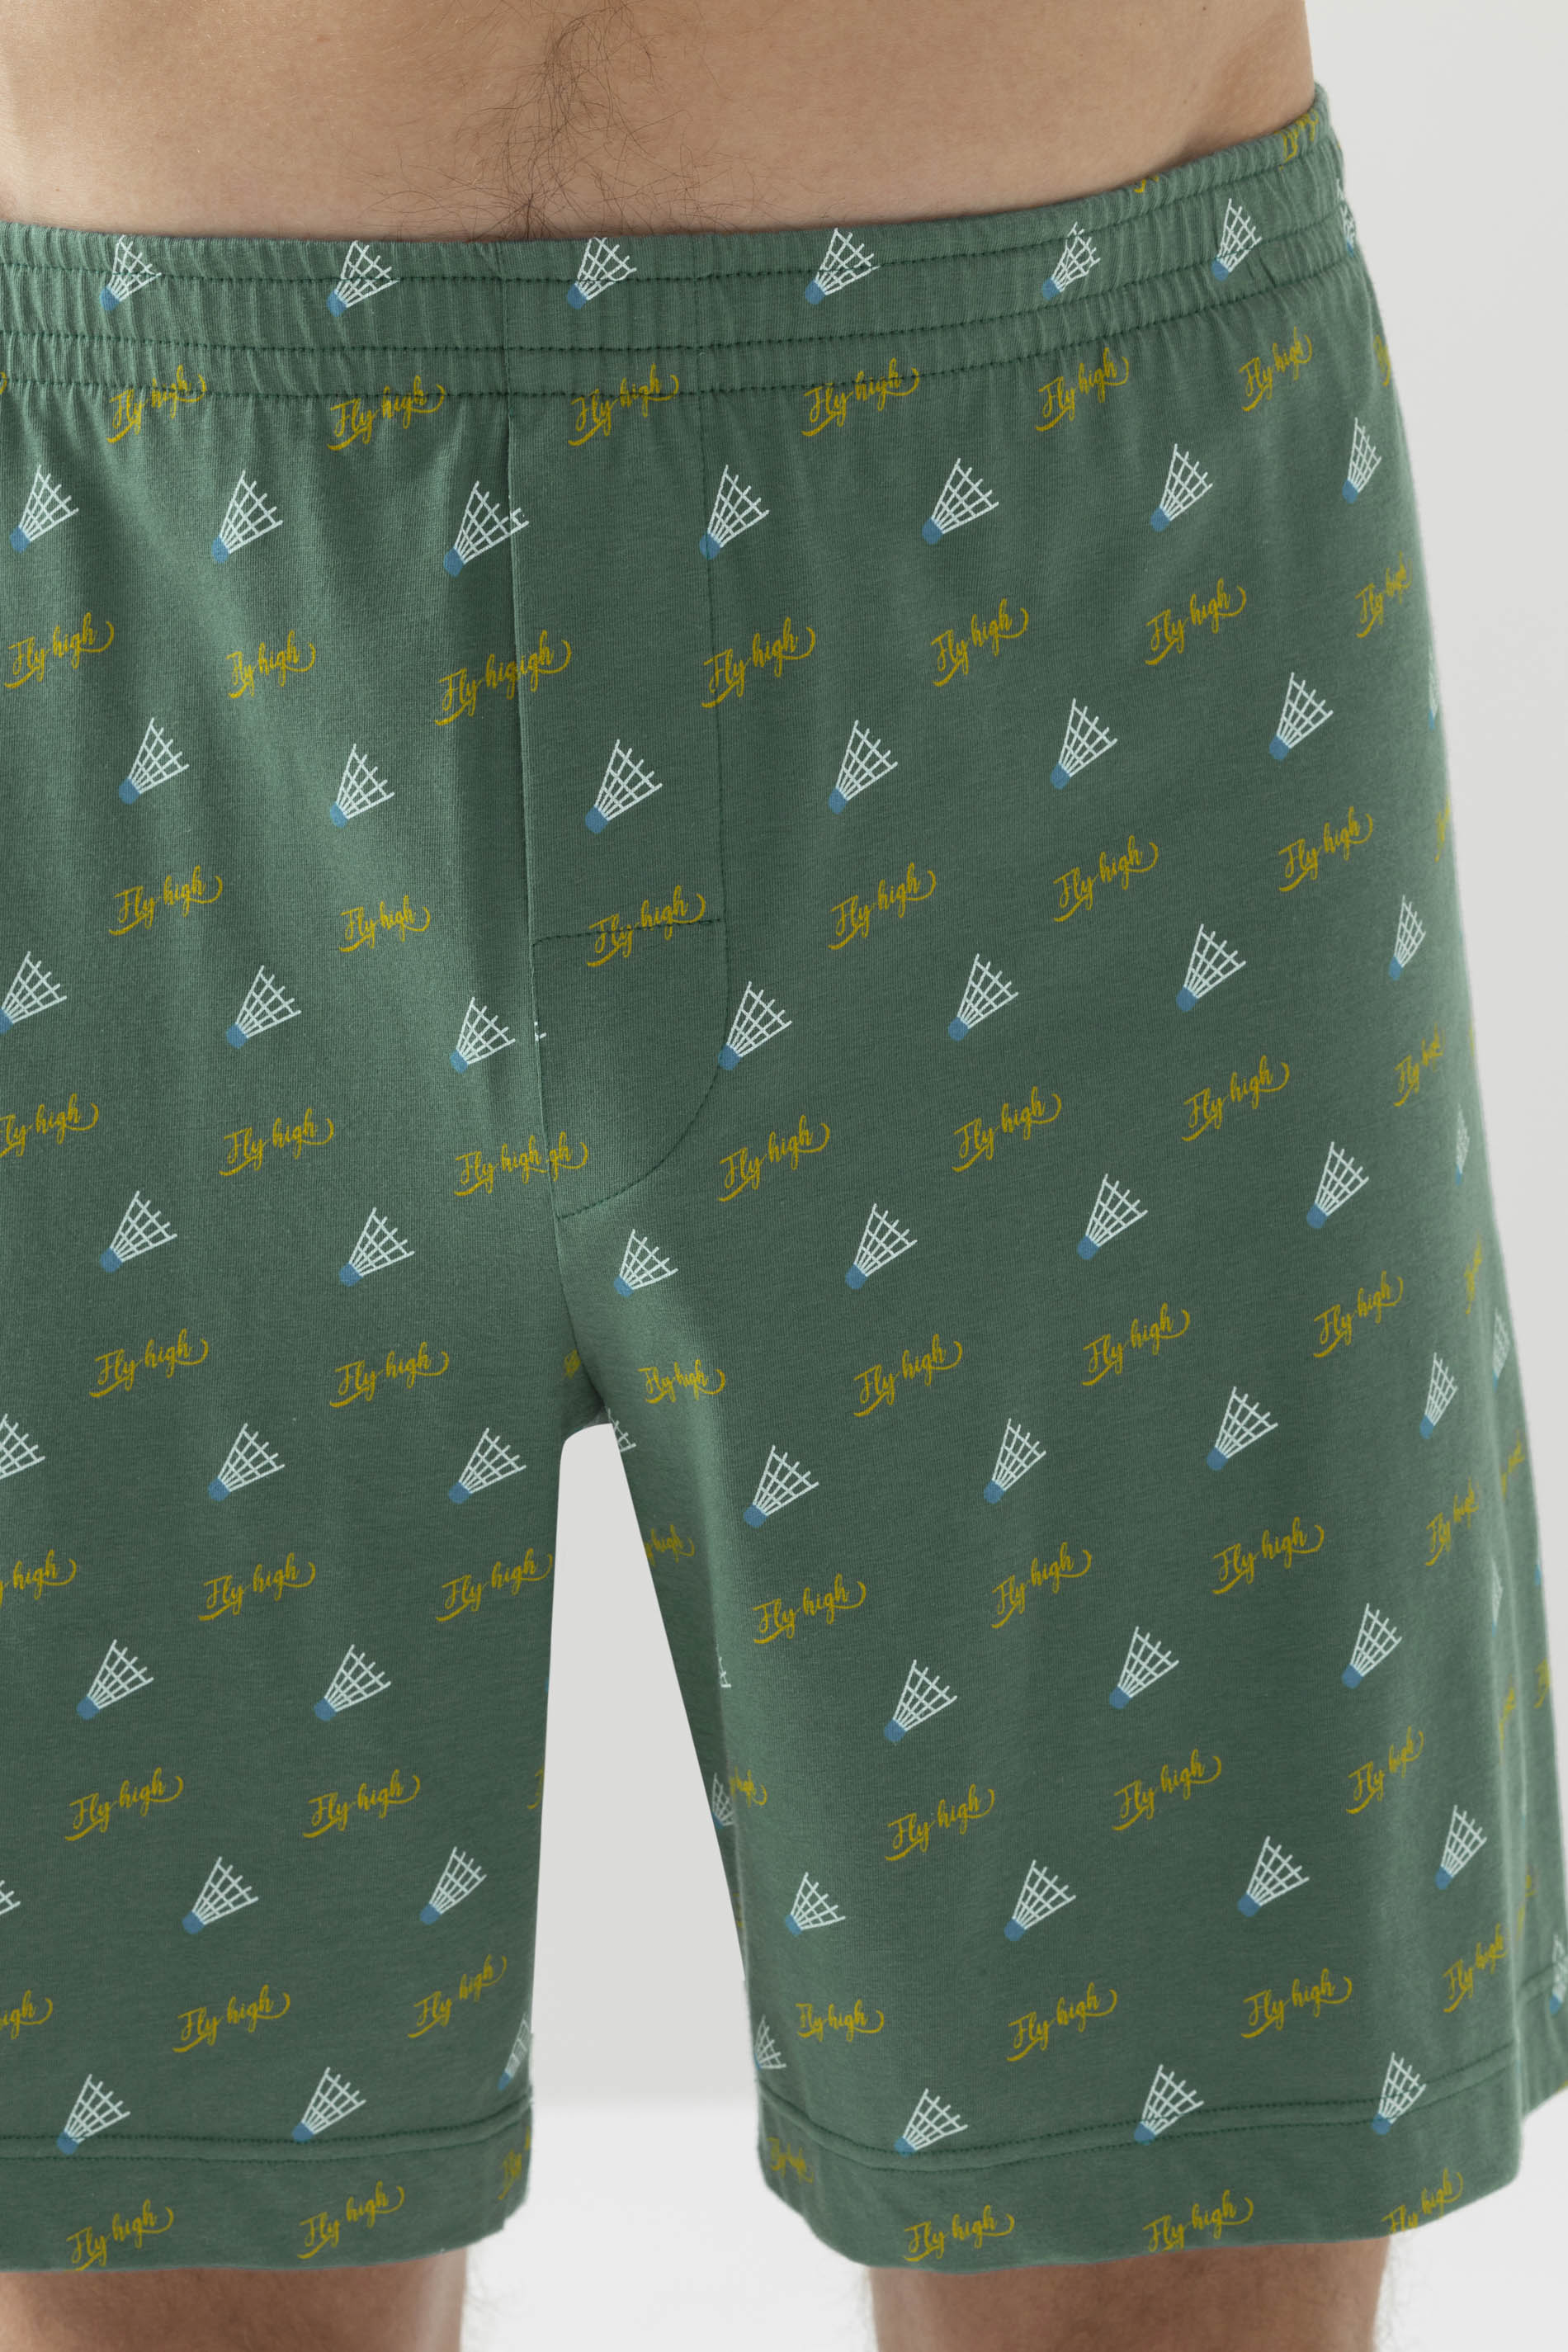 Shorts Serie Fly High Detailweergave 01 | mey®